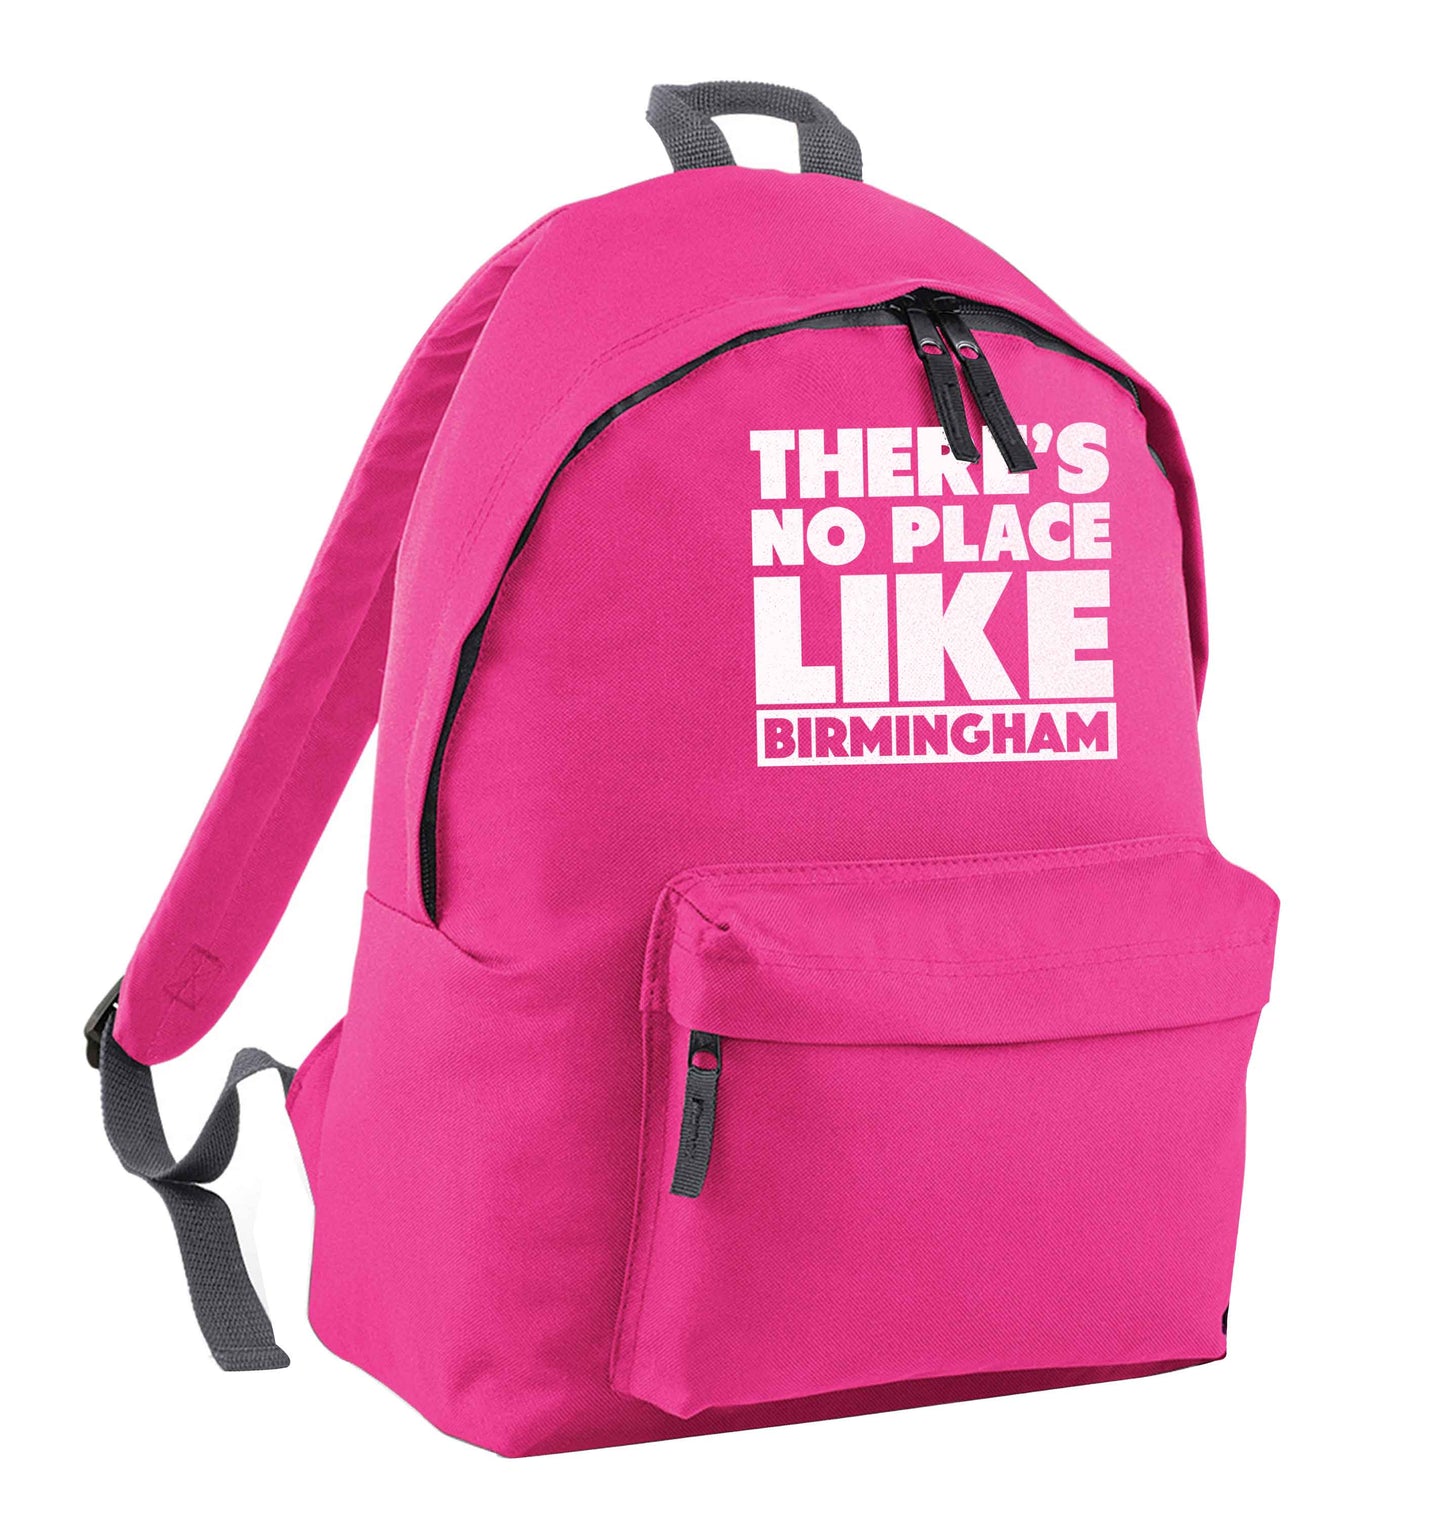 There's no place like Birmingham pink children's backpack